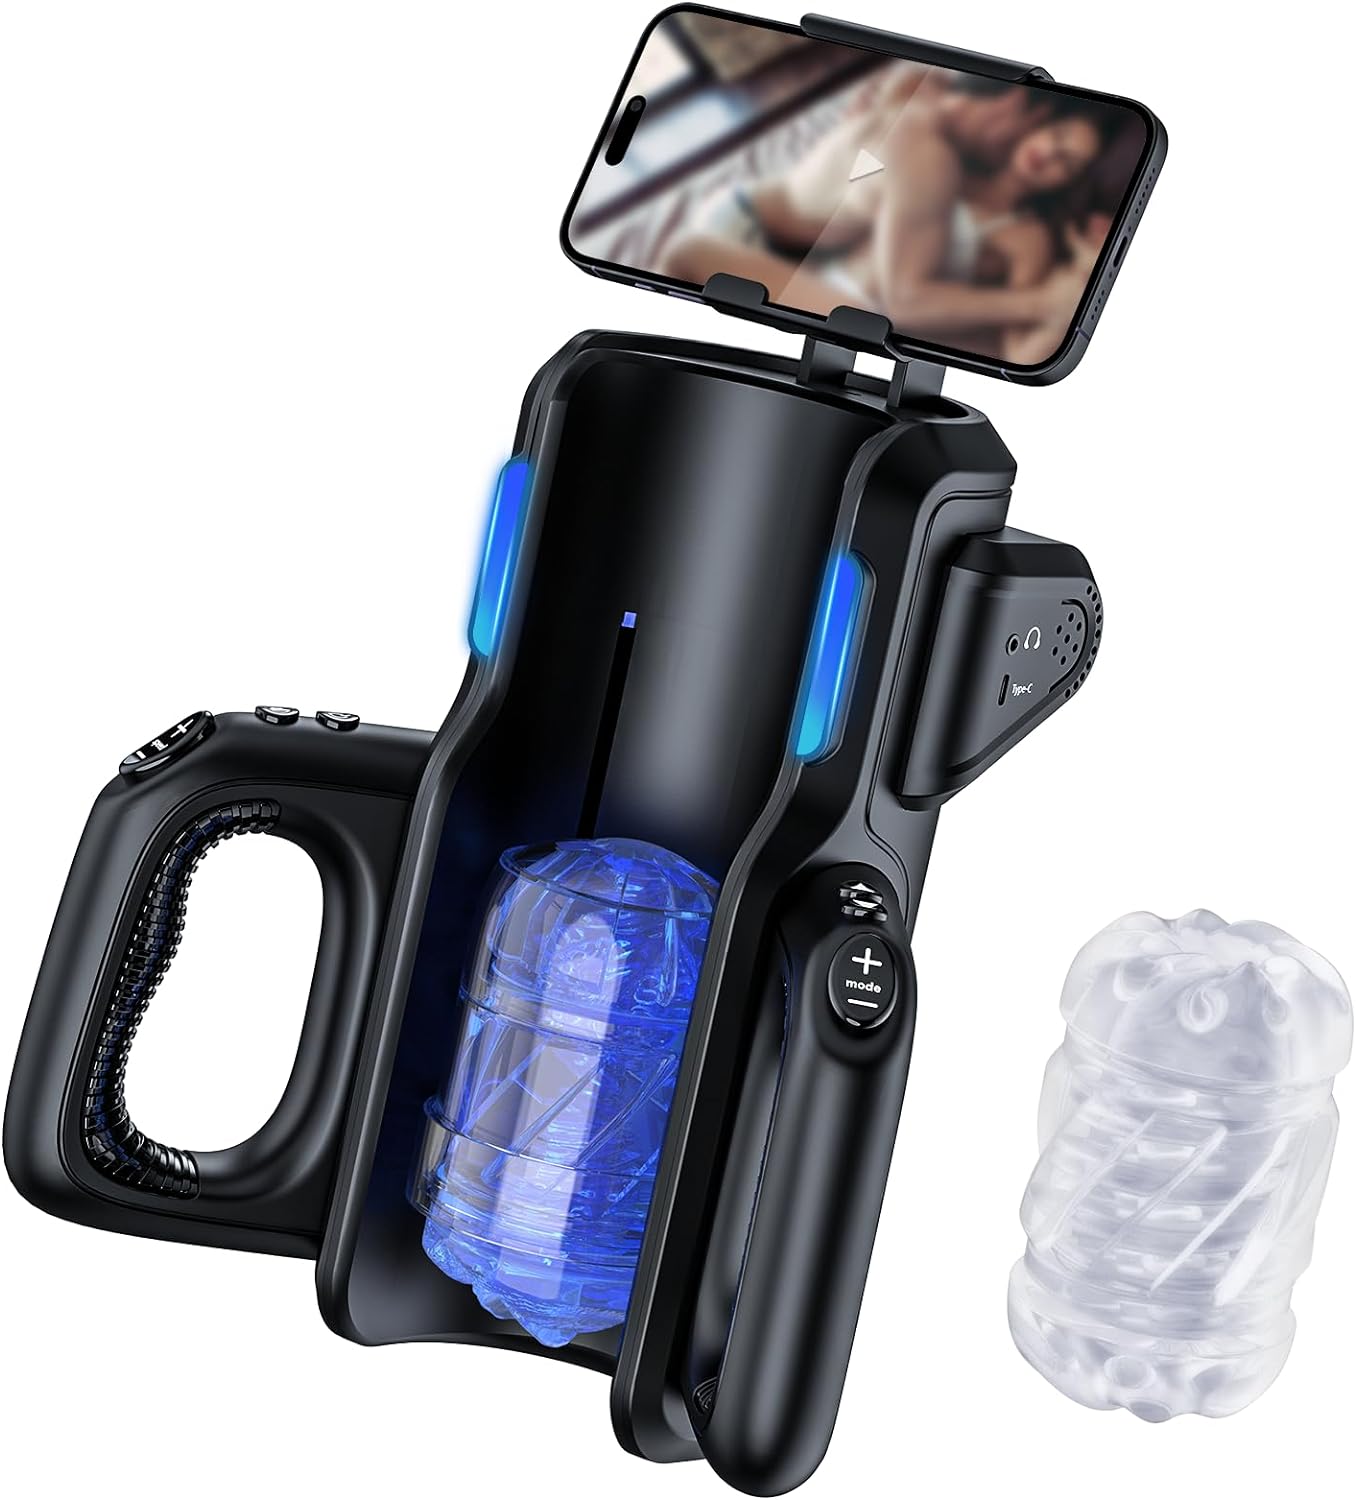 Sex Toy Automatic Male Masturbator - Men Electric Adult Sex Machine with 12times/s Thrusting, Hand Free Penis Training Stroker with Phone Holder and 2 Soft Silicone Pocket Pussy Sleeves